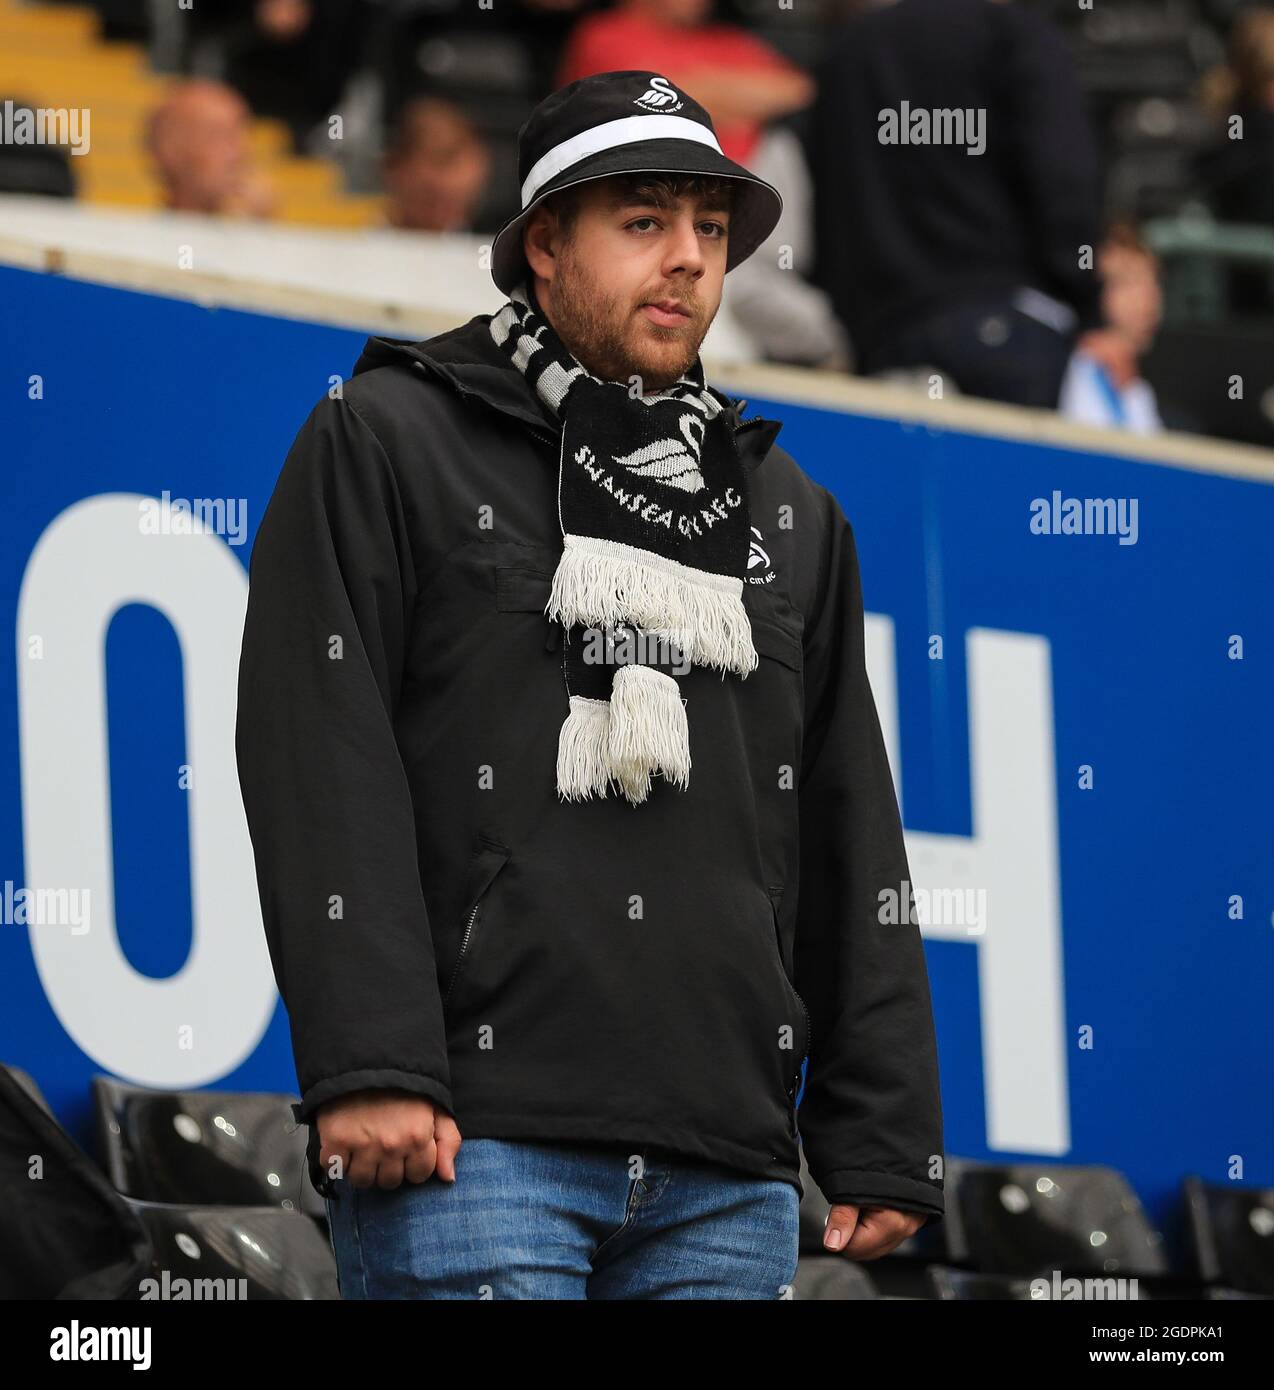 Liberty Stadium, Swansea, UK. 14th Aug, 2021. EFL Championship League football, Swansea versus Sheffield United: A Swansea City fan savours the atmosphere before kick off after a season out with the pandemic Credit: Action Plus Sports/Alamy Live News Stock Photo